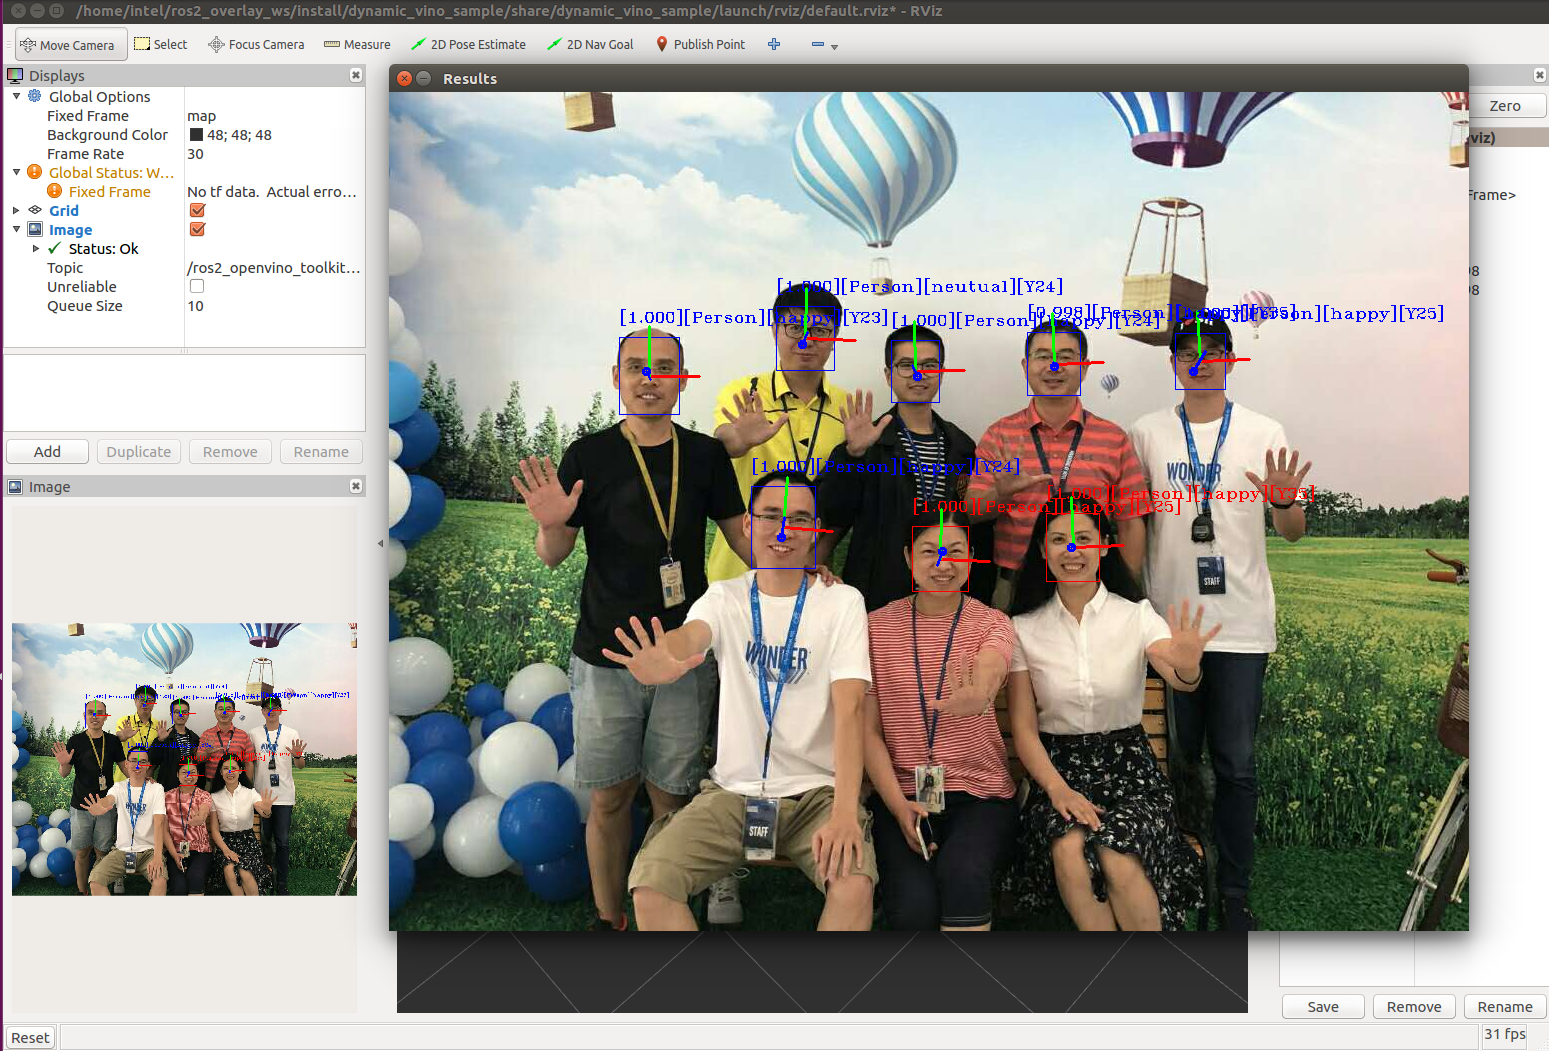 face_detection_demo_image